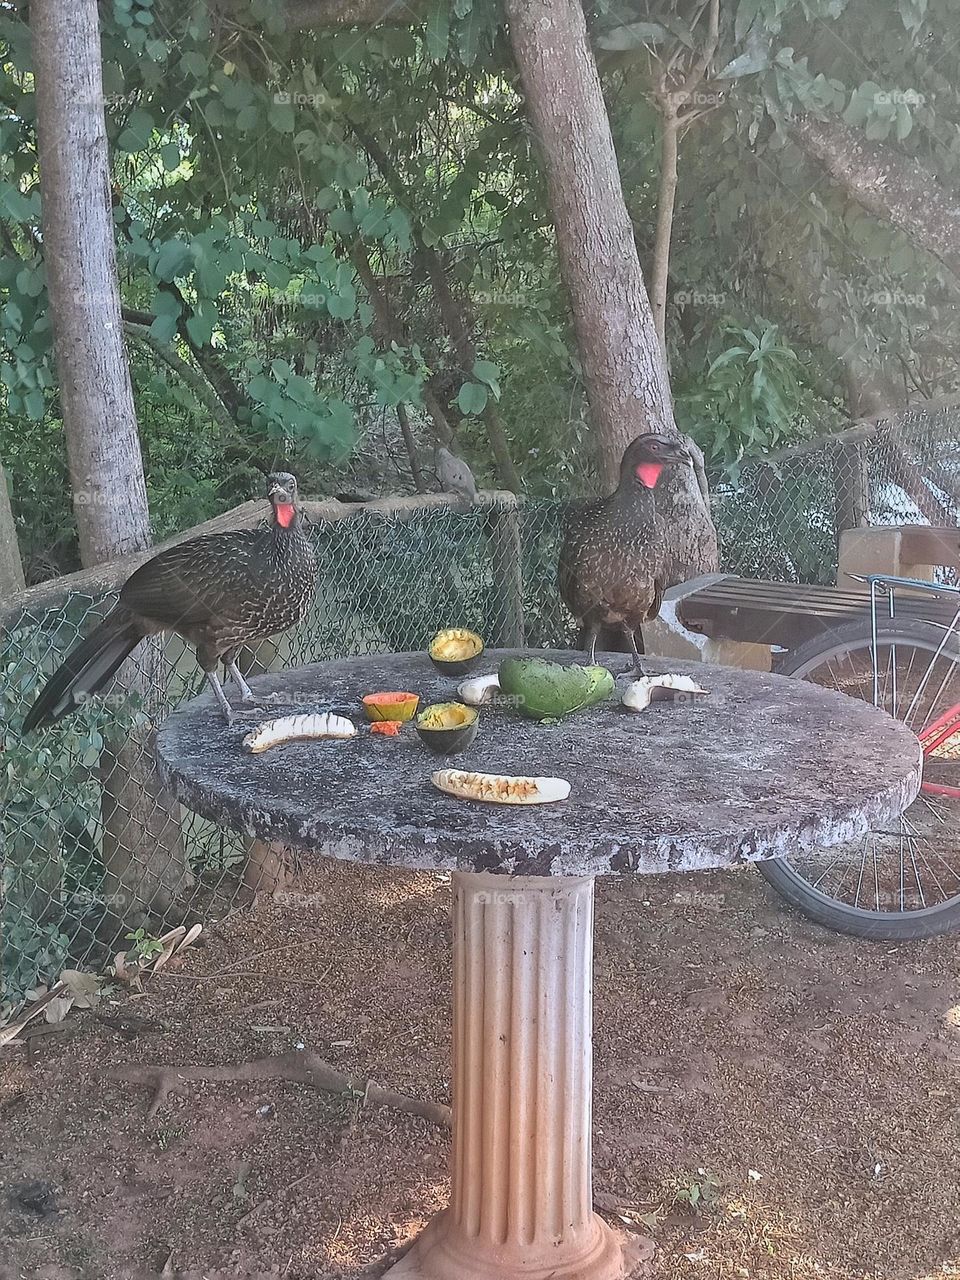 Two Dusky legged guan feeding on a round table on a path by the river in a city